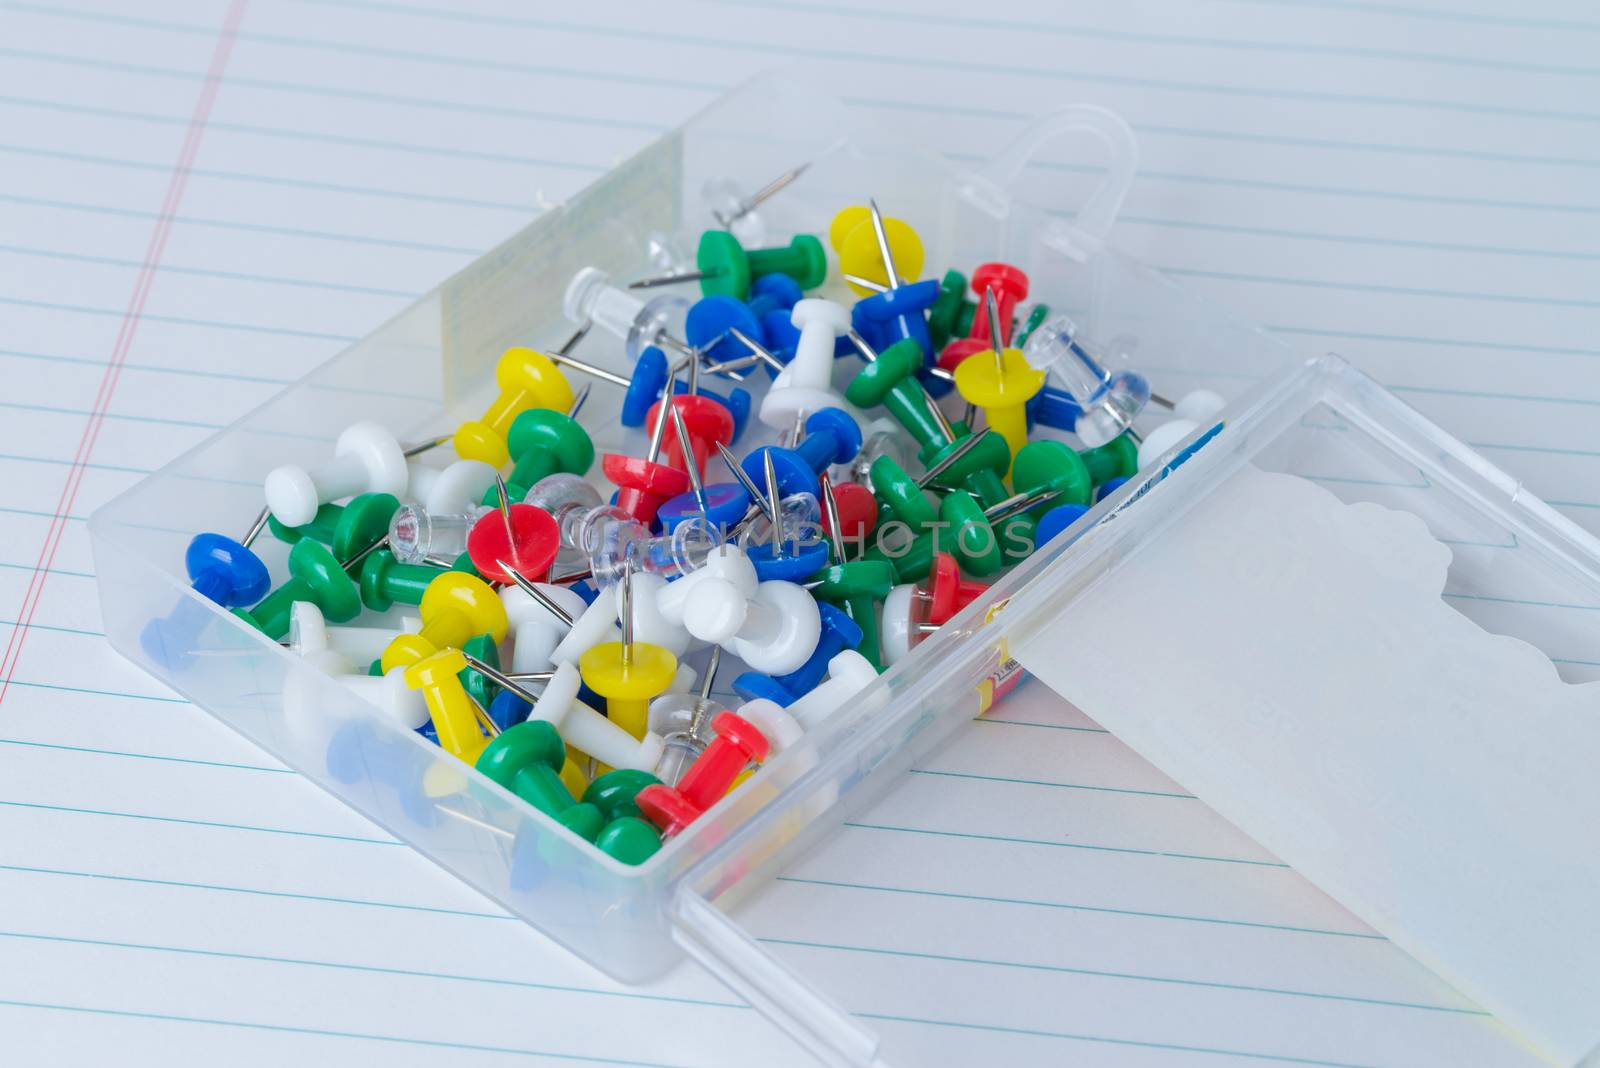 Case of Thumb Tacks by justtscott